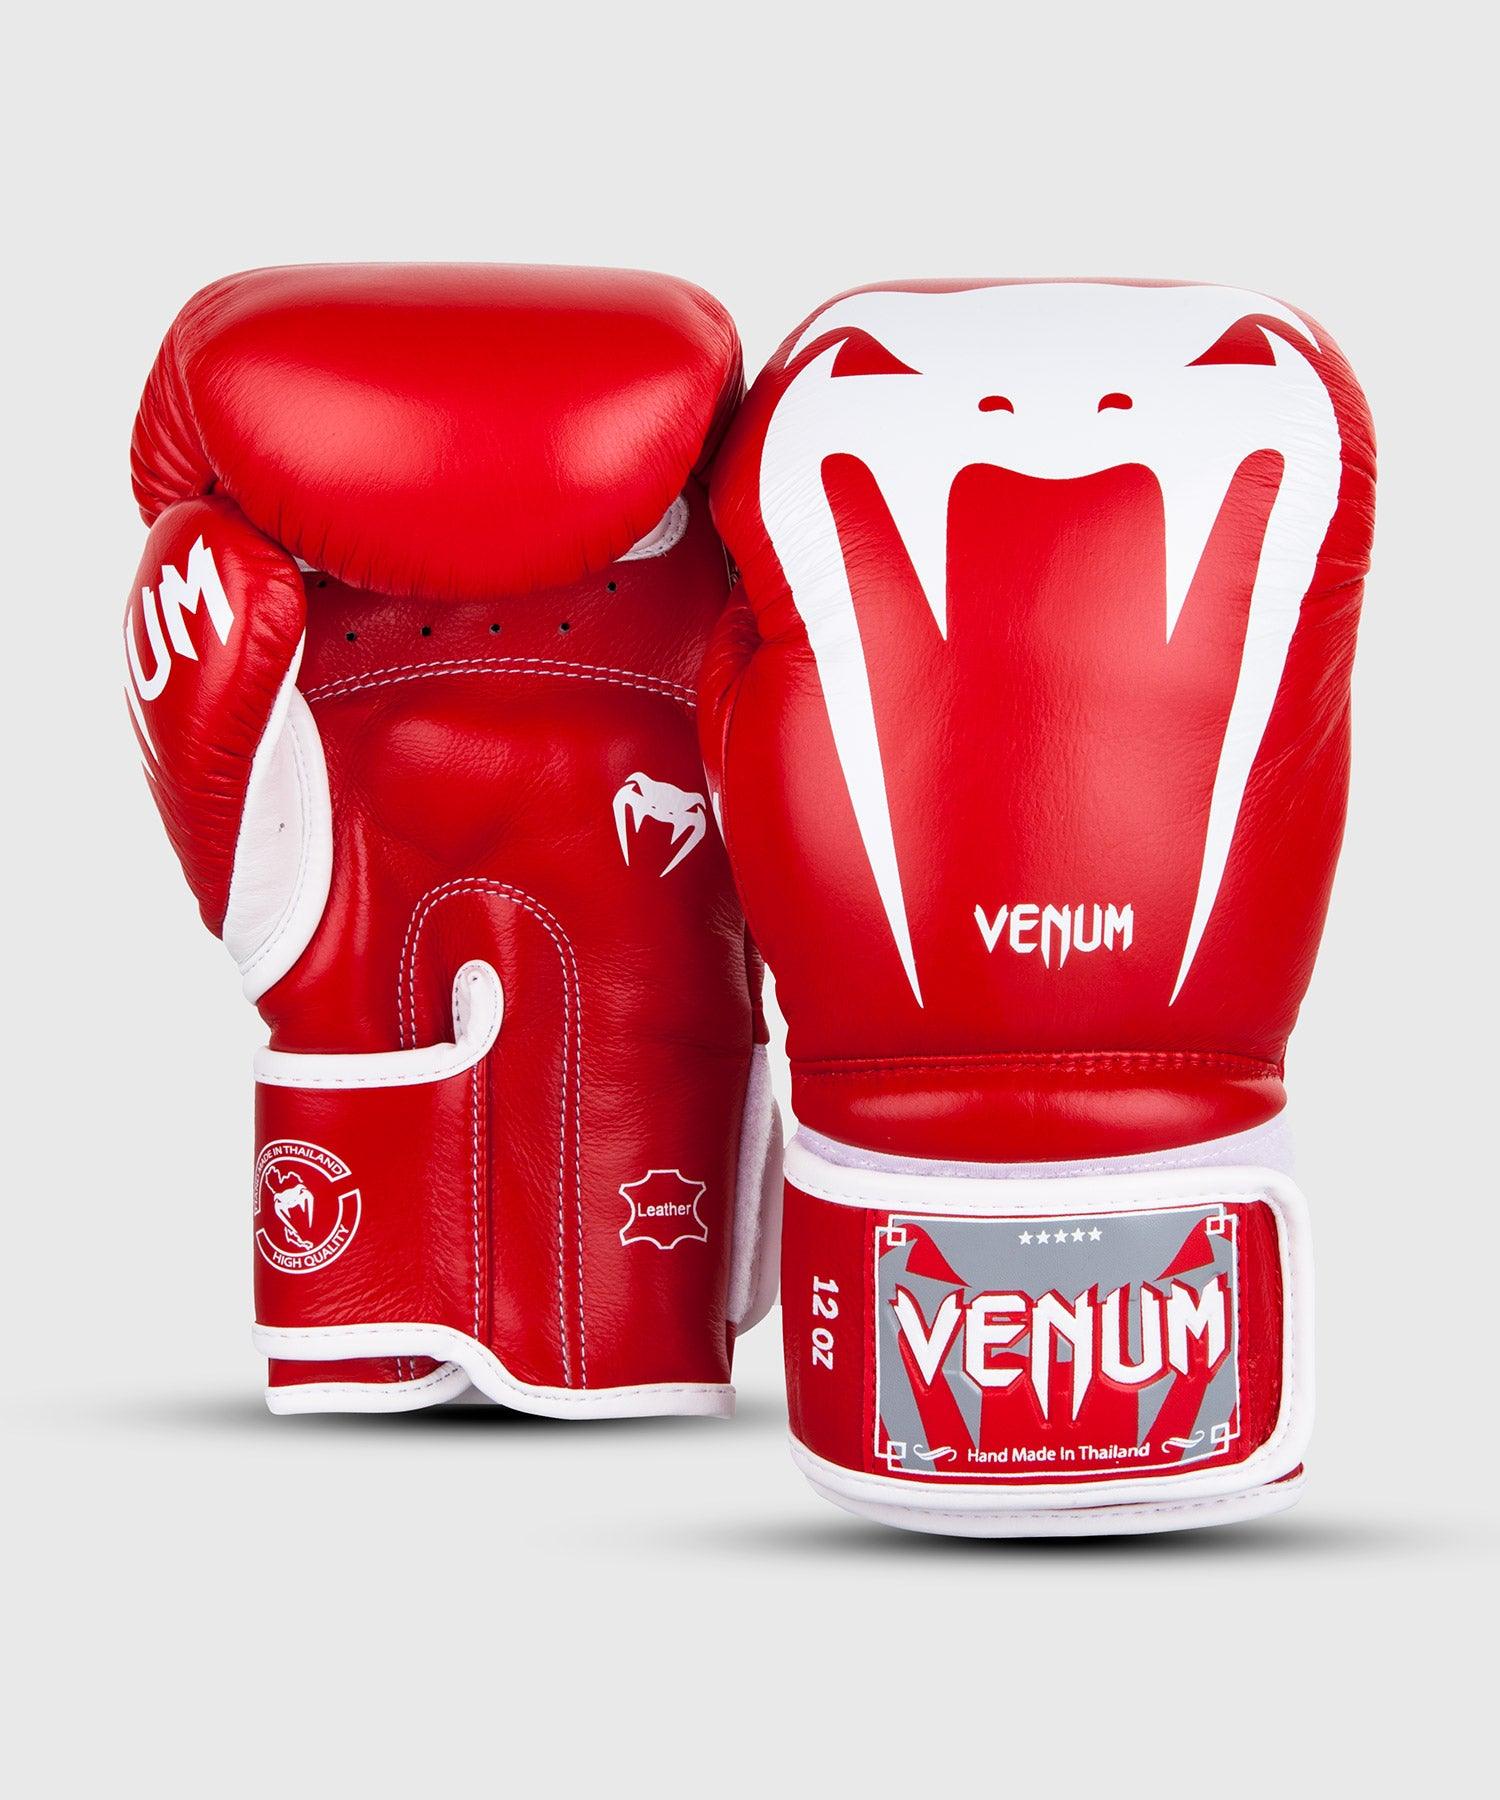 Venum Giant 3.0 Boxing Gloves - Nappa Leather - Red Picture 2